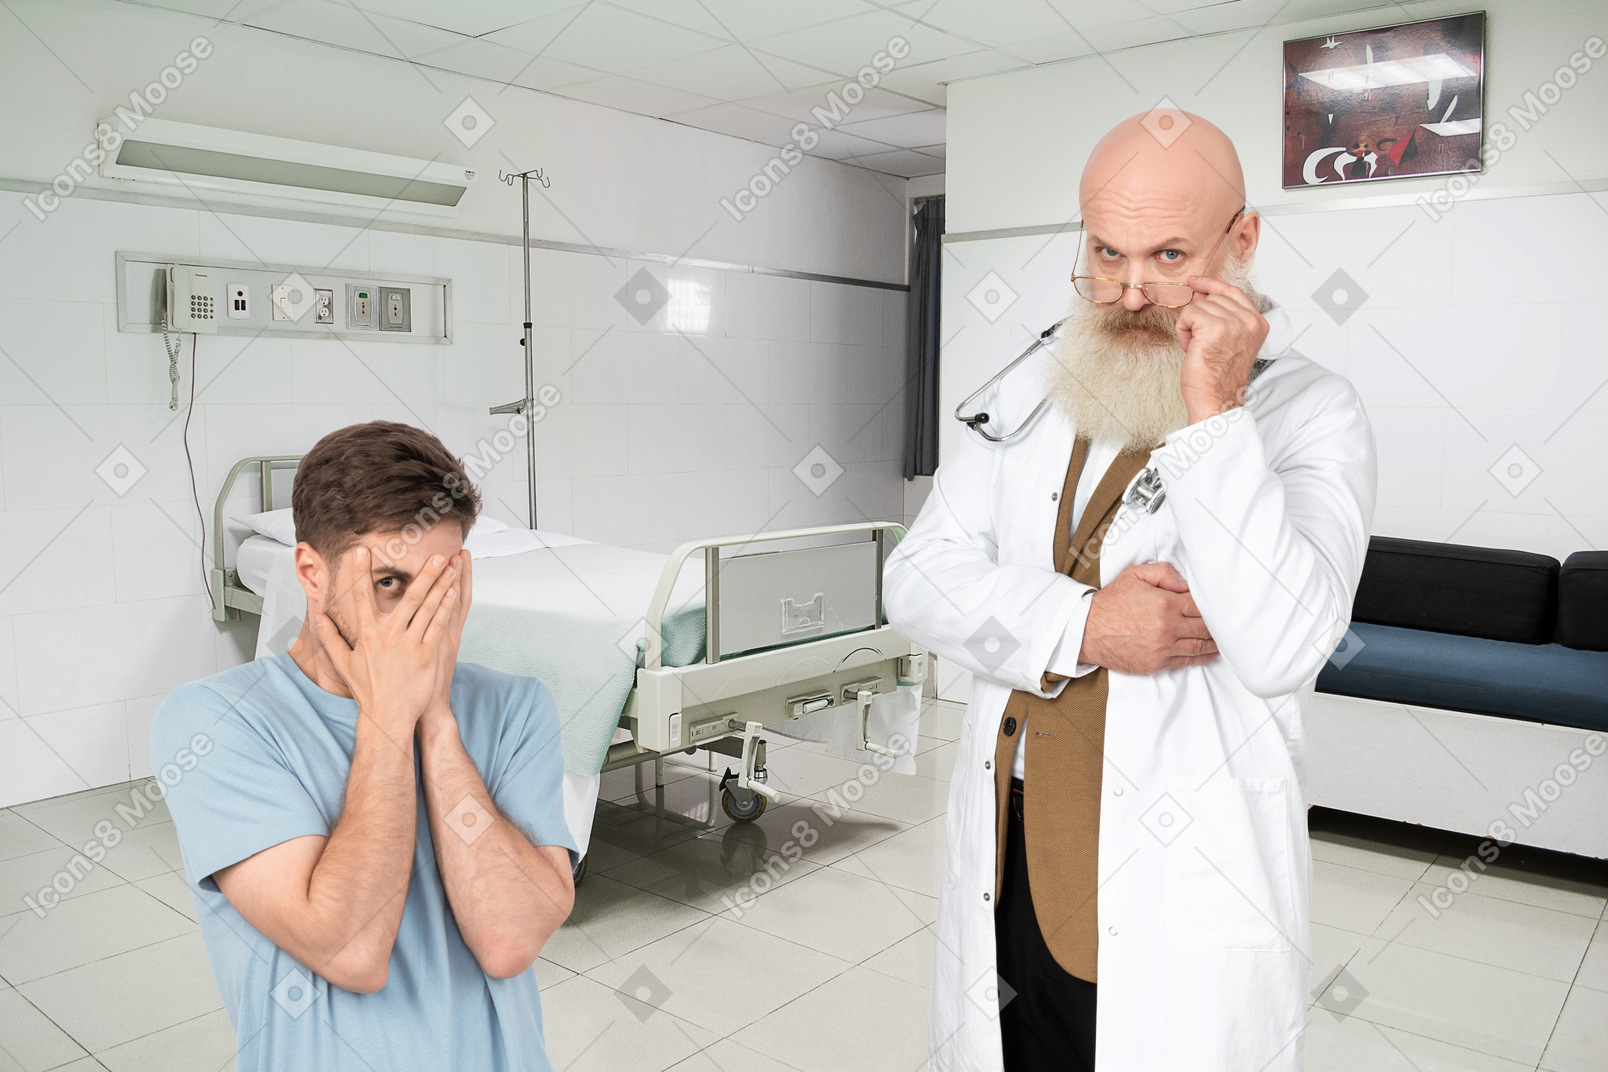 A doctor and a patient in a hospital room